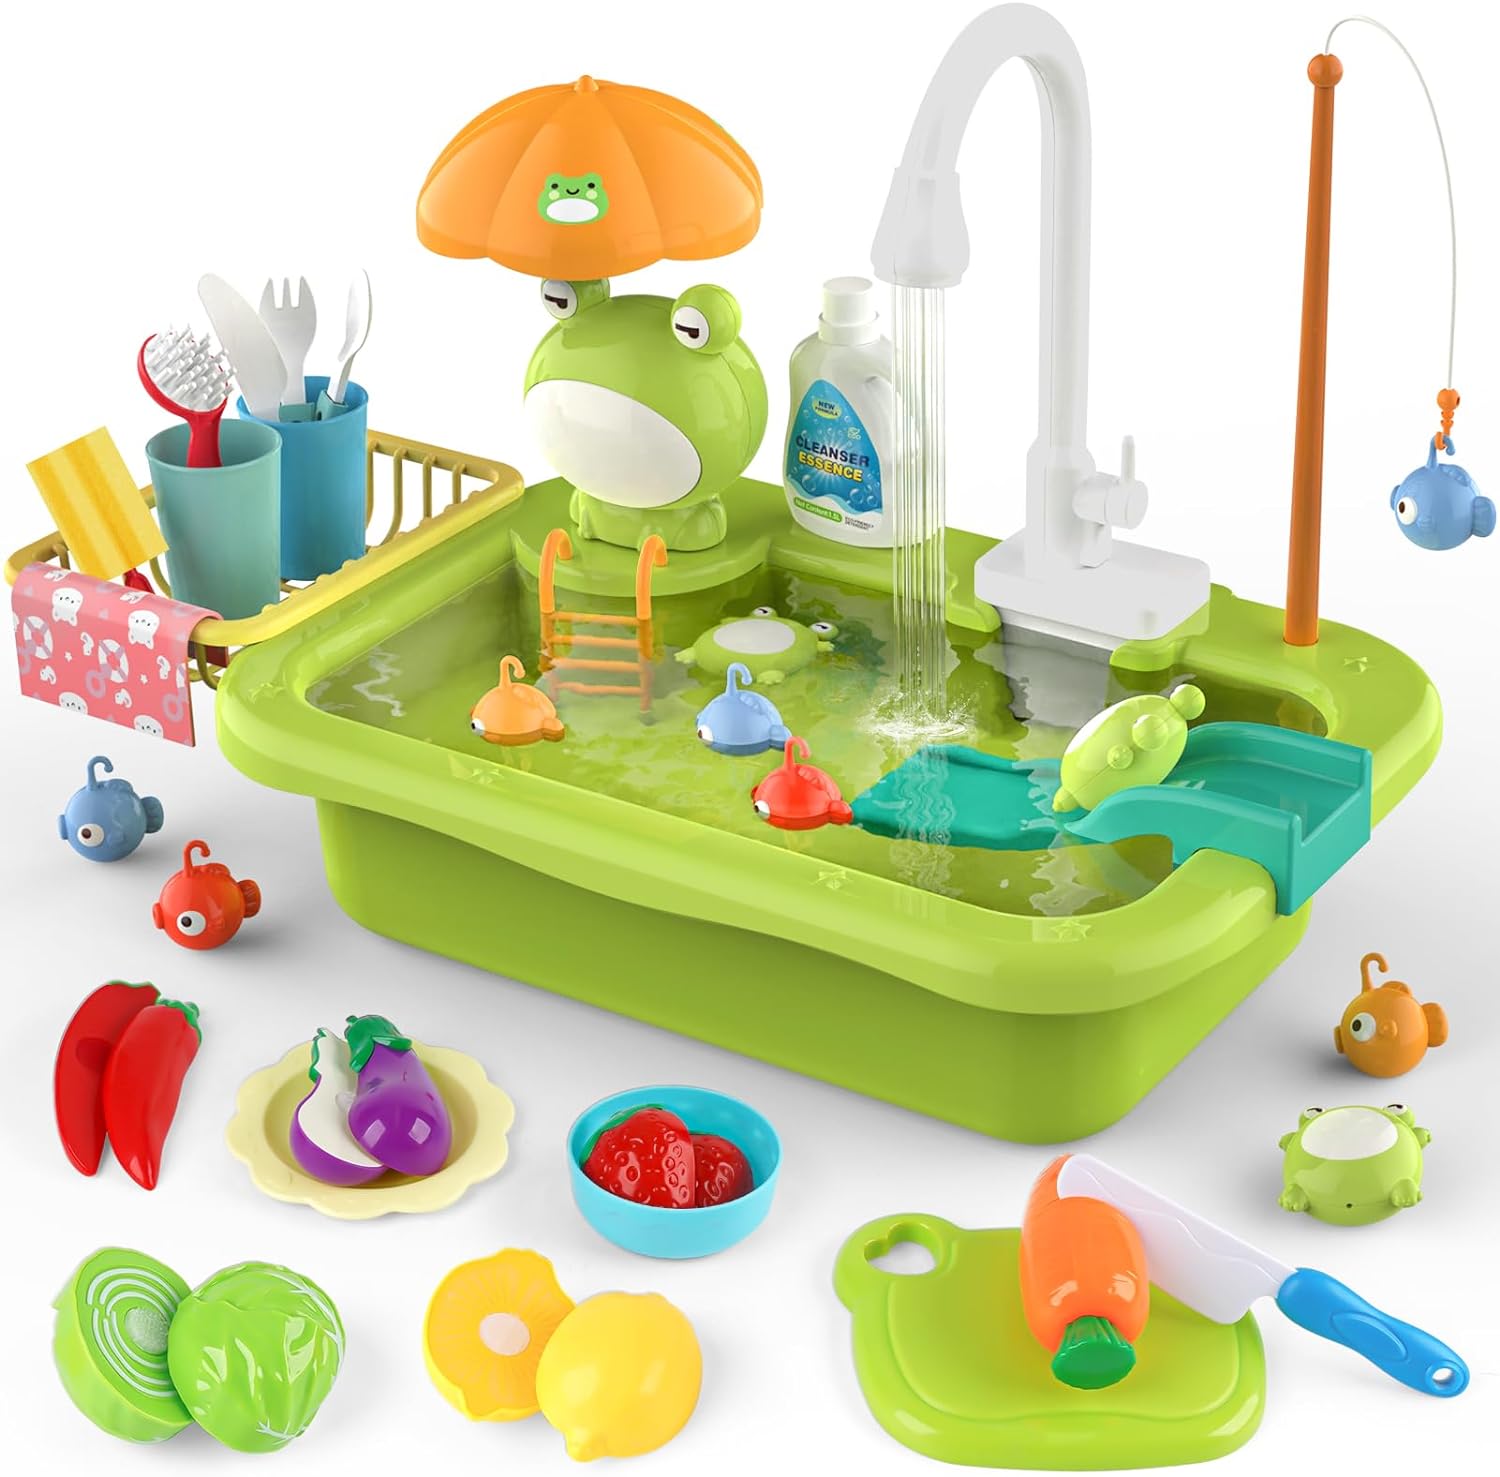 Play Sink Toy with Running Water, Kids Play Kitchen Accessories with Automatic Water Circulation - Cykapu